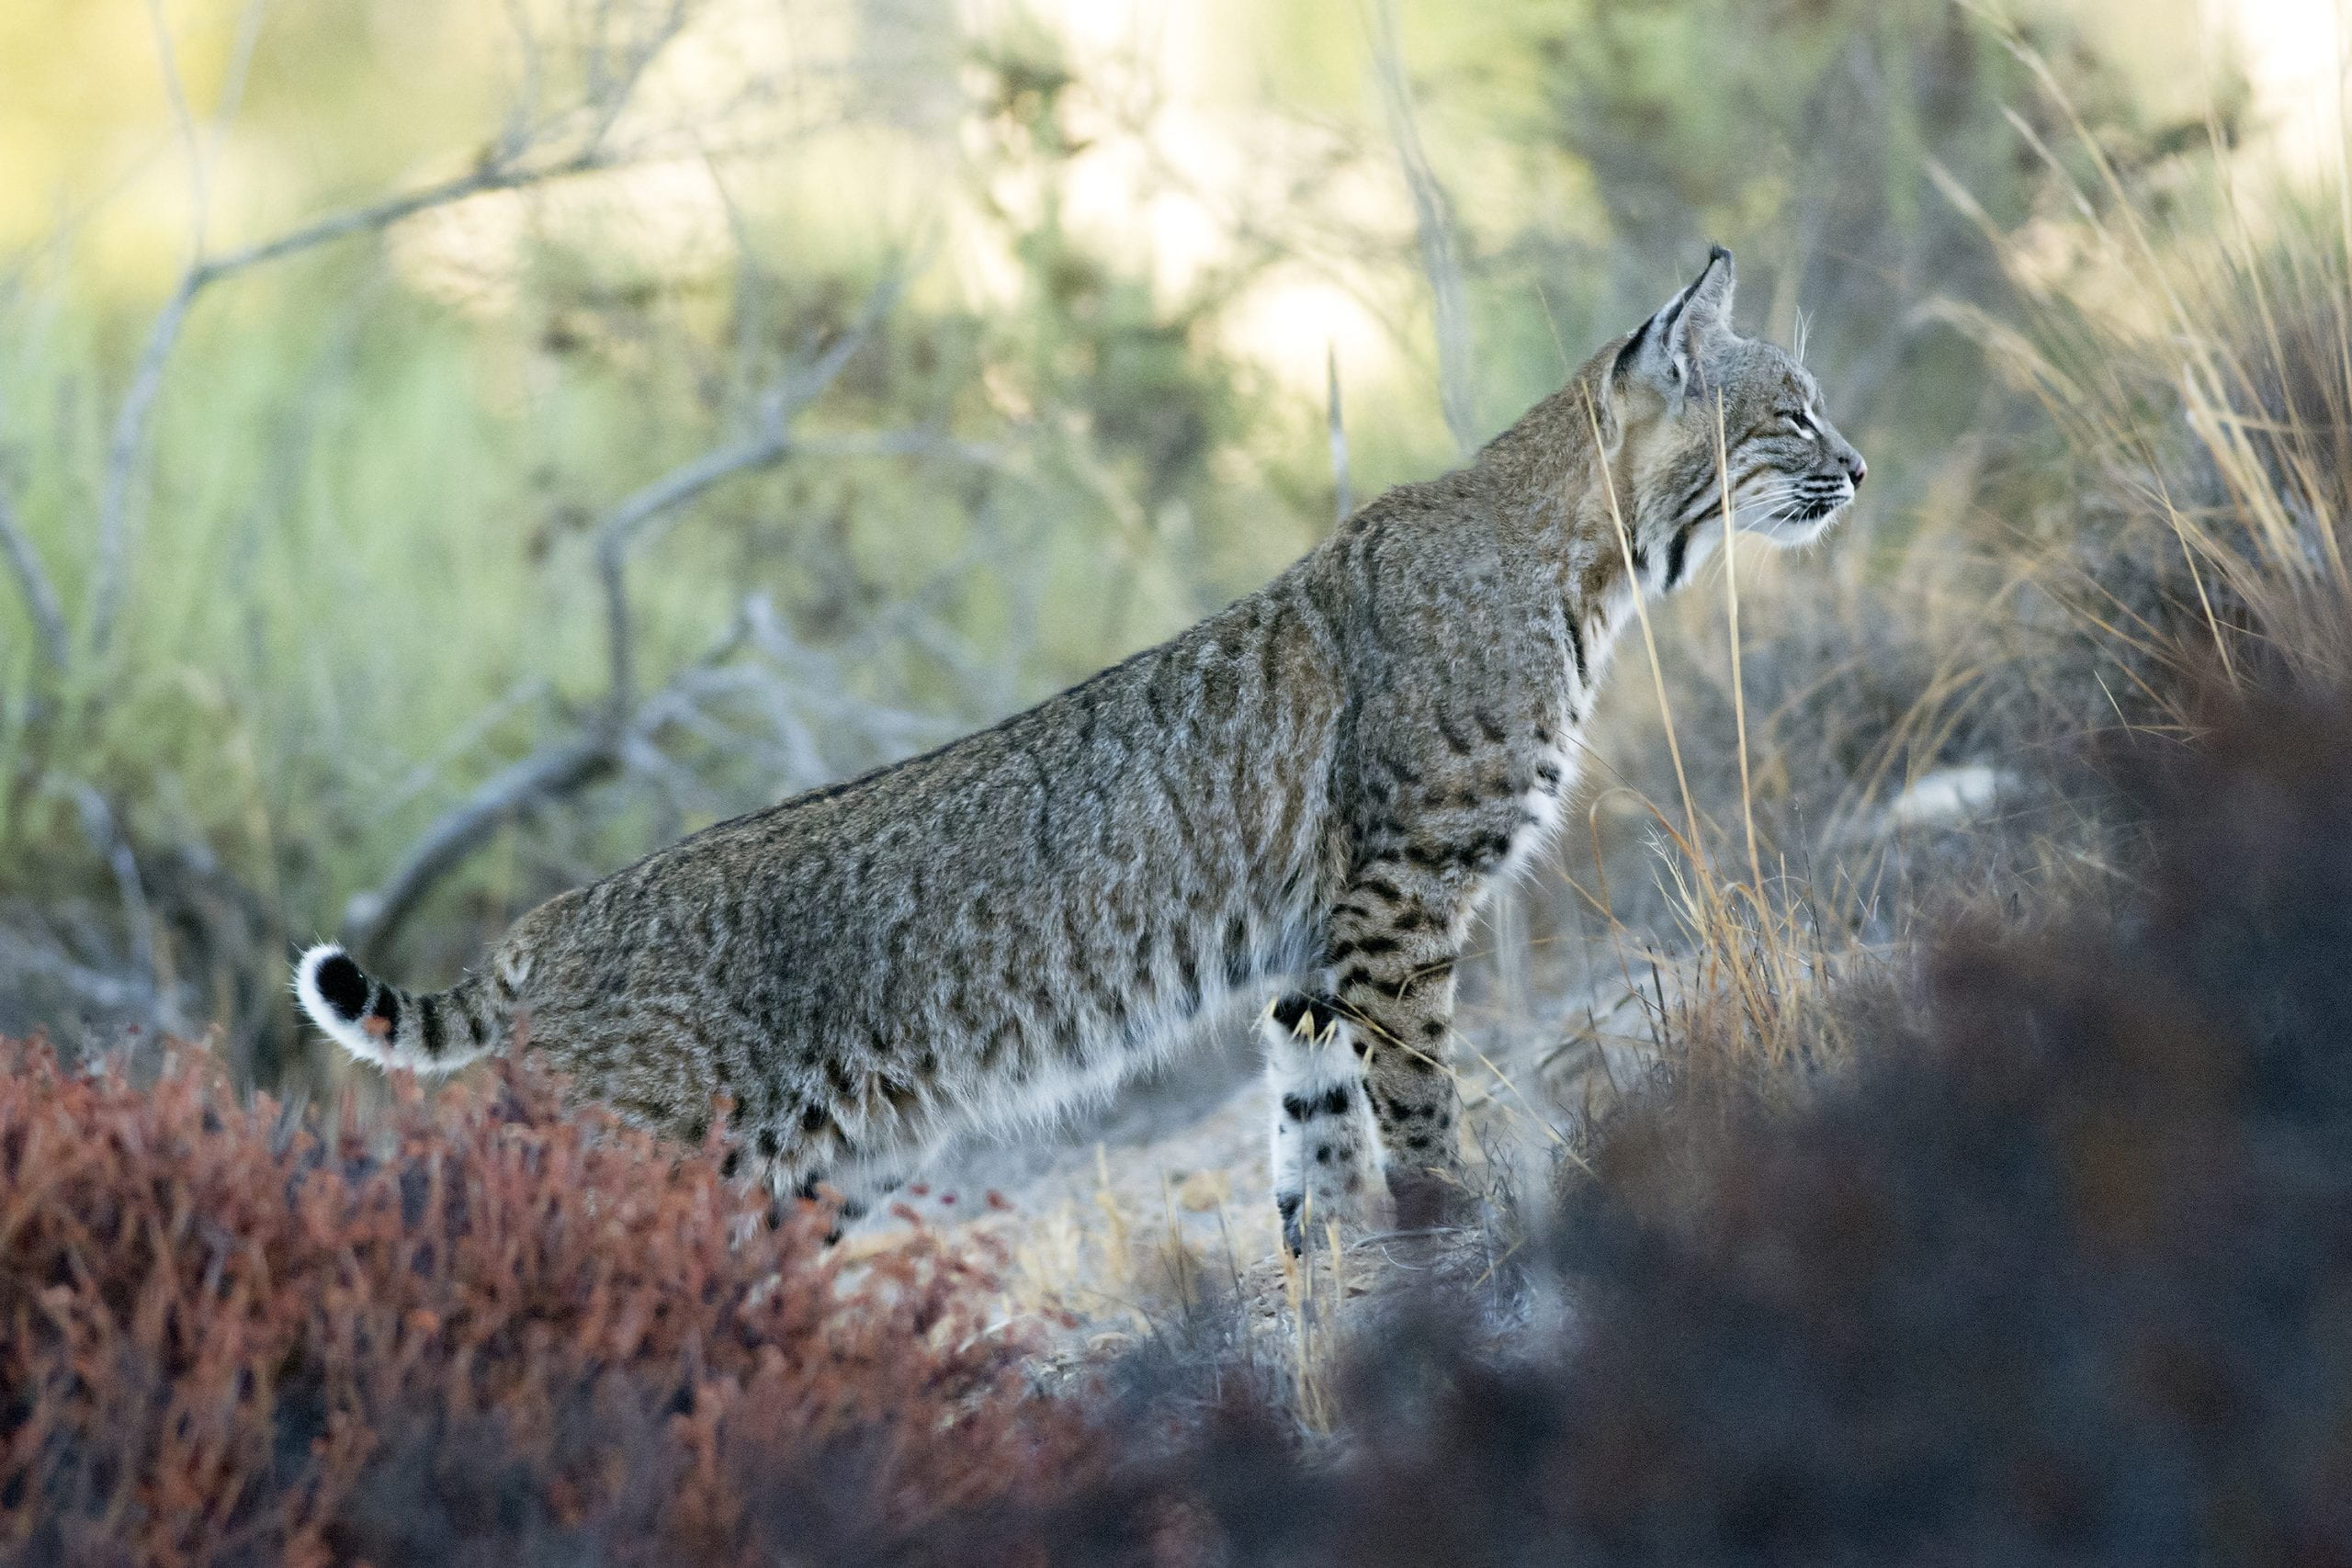 Bobcats are occasionally spotted at the preserve, which features three meandering trails.